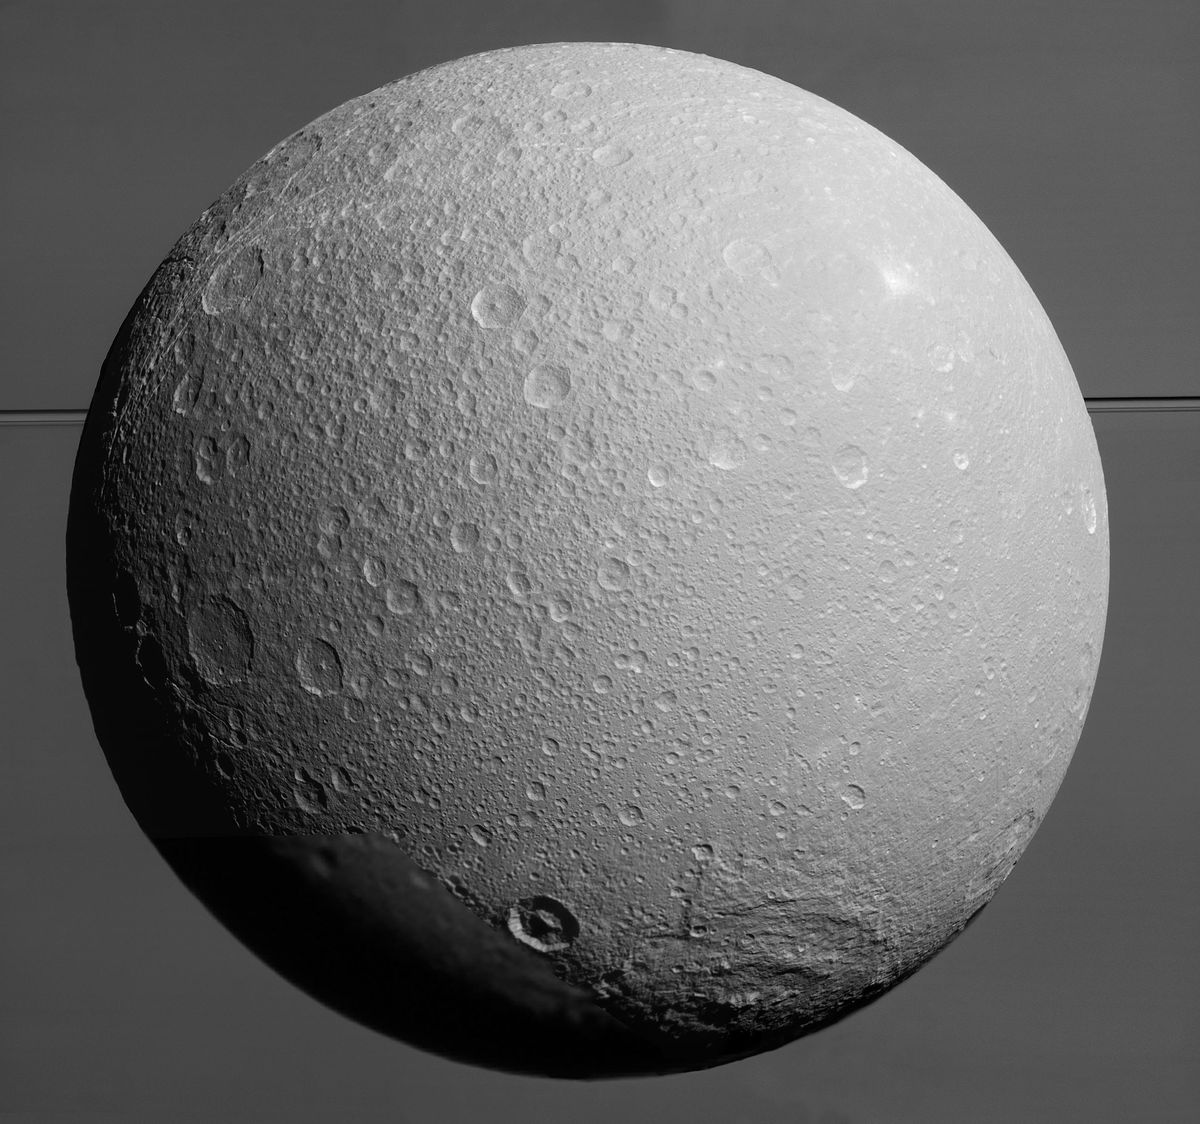 Dione with Saturn and its rings.